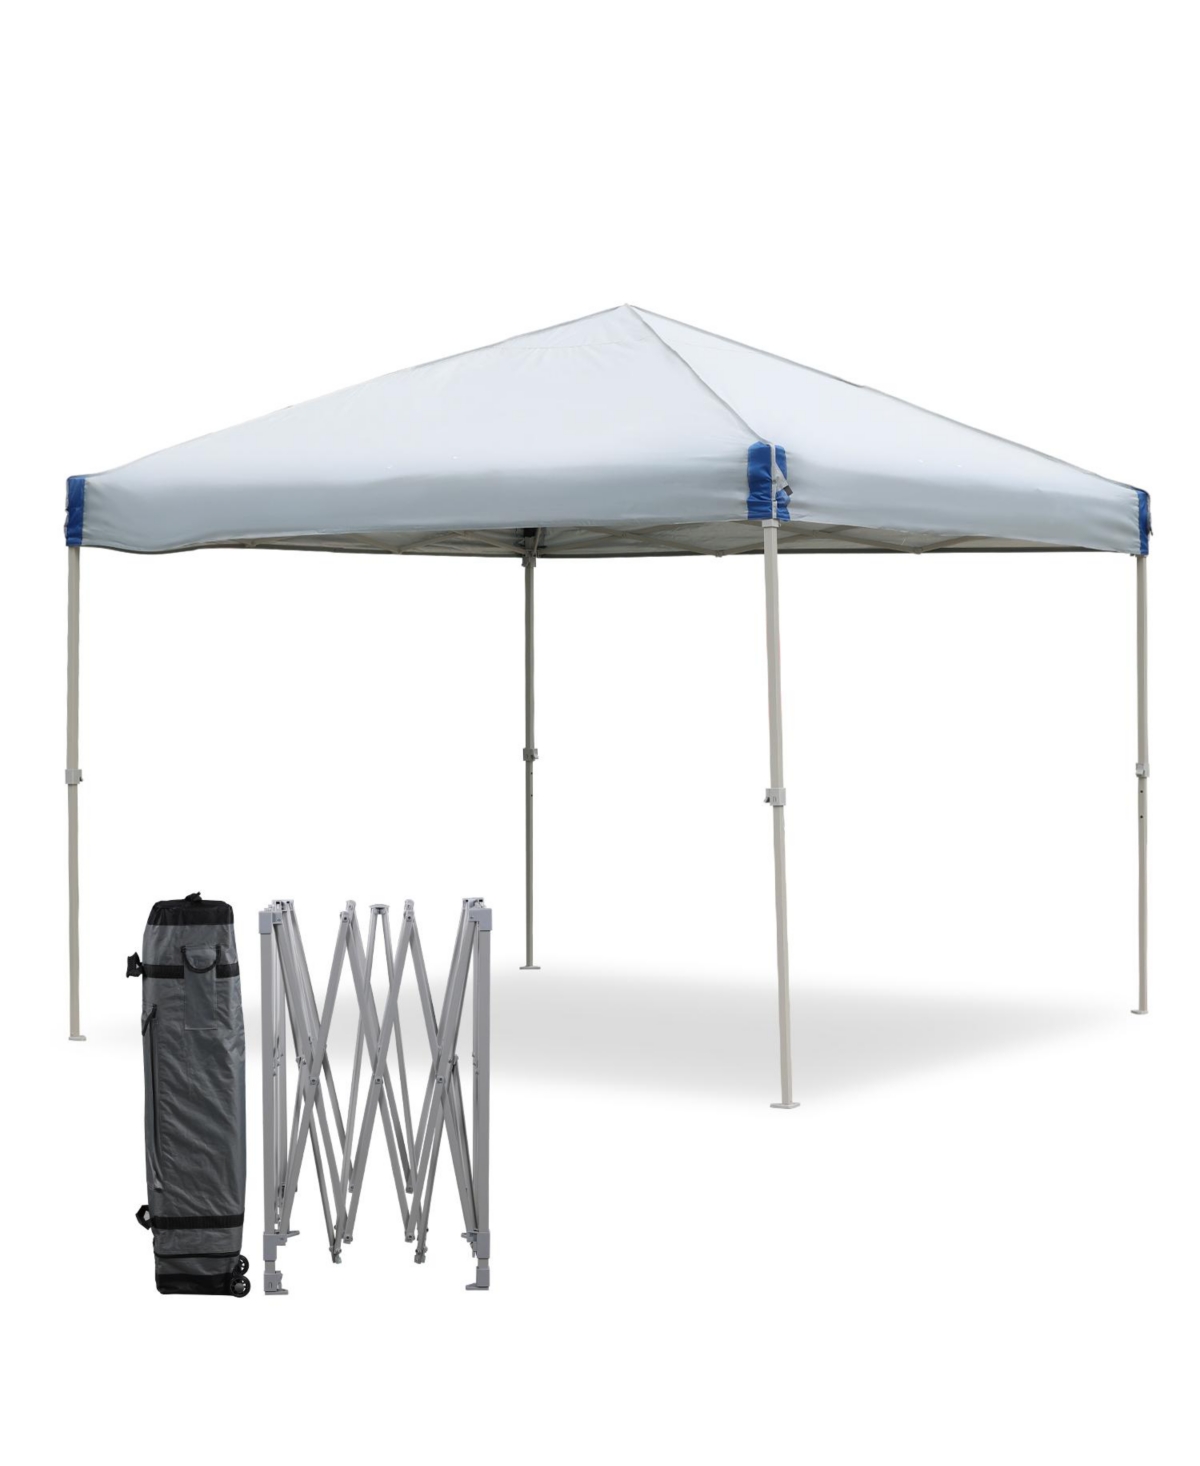 9.8'x9.8' Pop Up Canopy Tent with Roller Bag, Portable Instant Shade Canopy - Grey